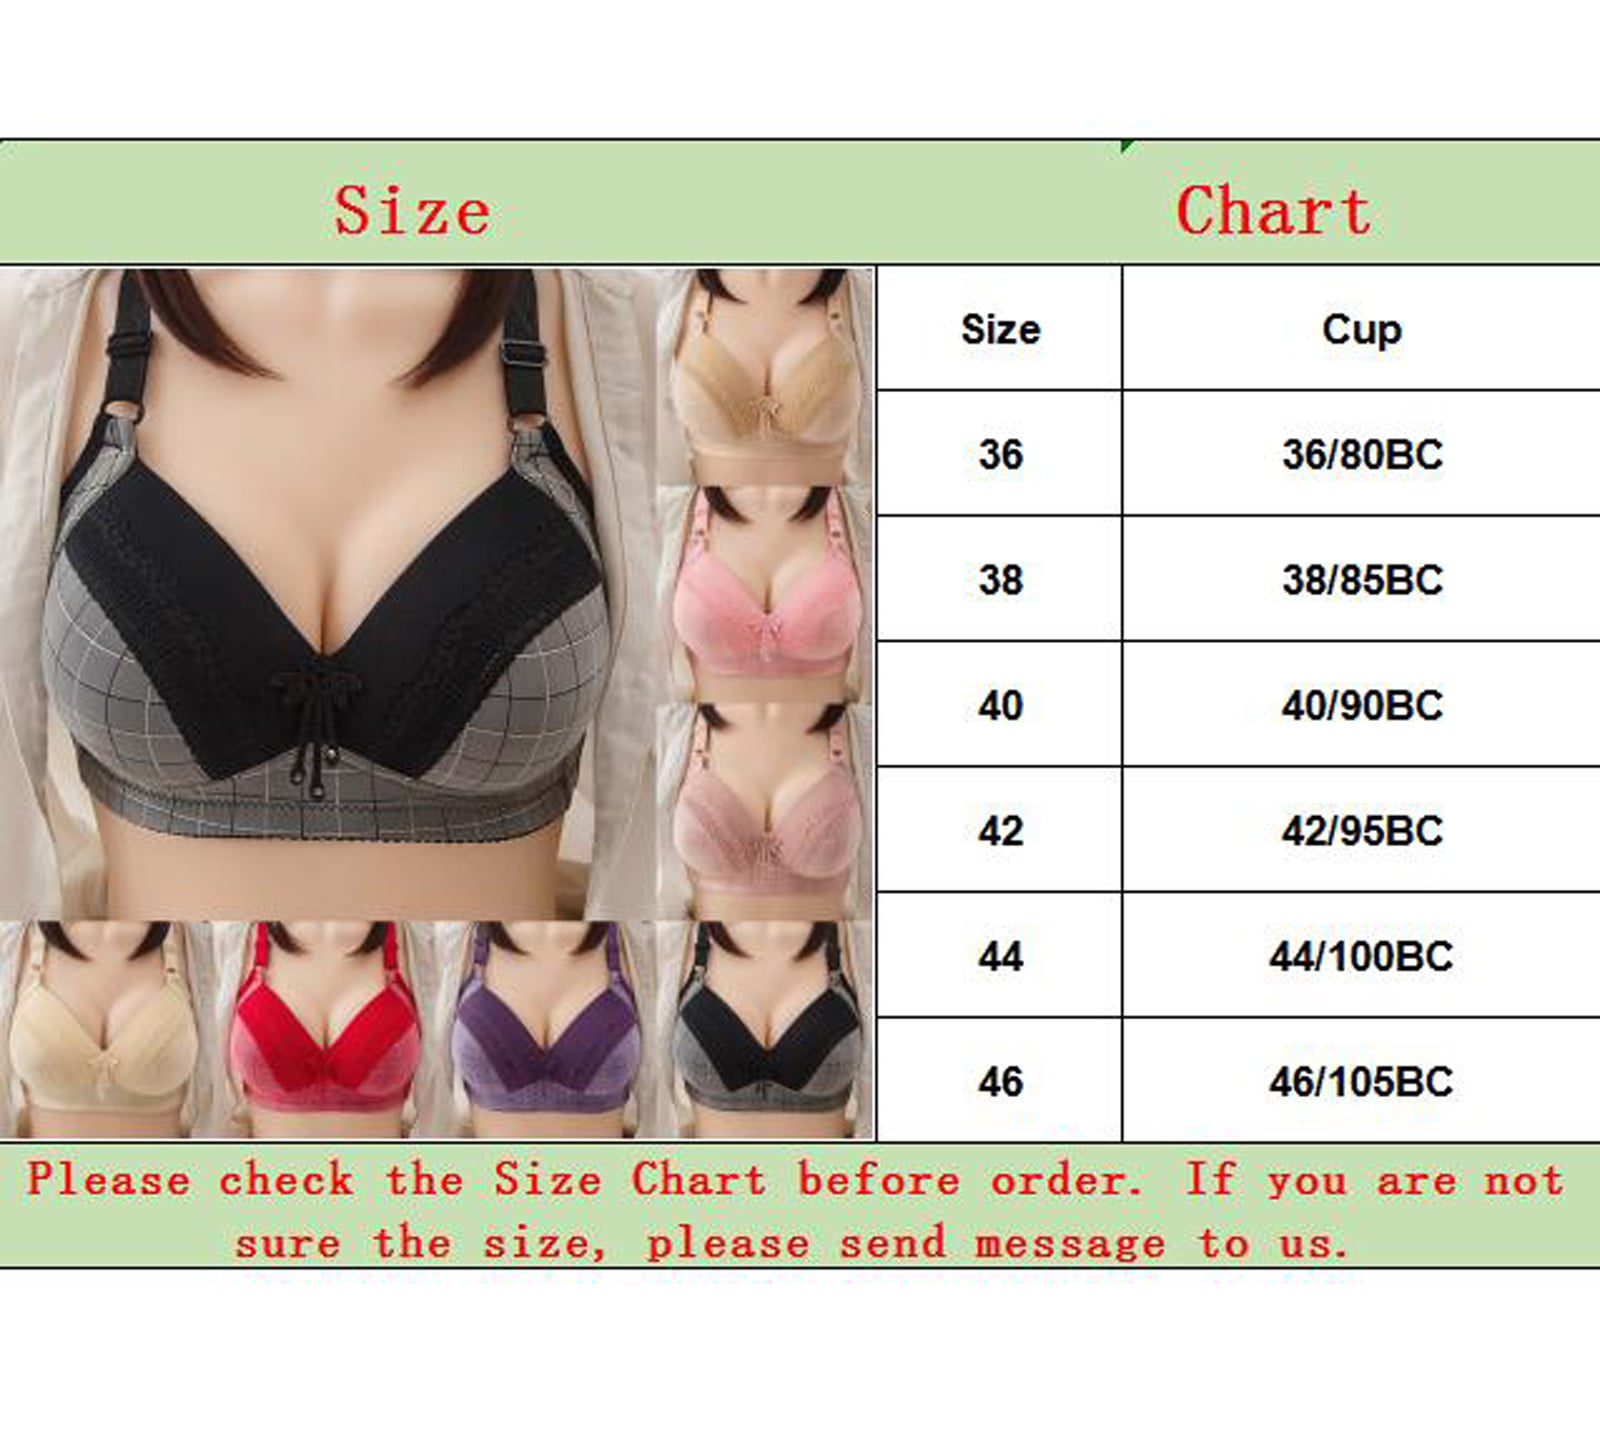 Fsqjgq Women's Lace Bra Large Size Ladies Underwear Breathable Comfortable  No Steel Rings Fixed Cups Gathered Bras Push up Brassiere Beige 34/75